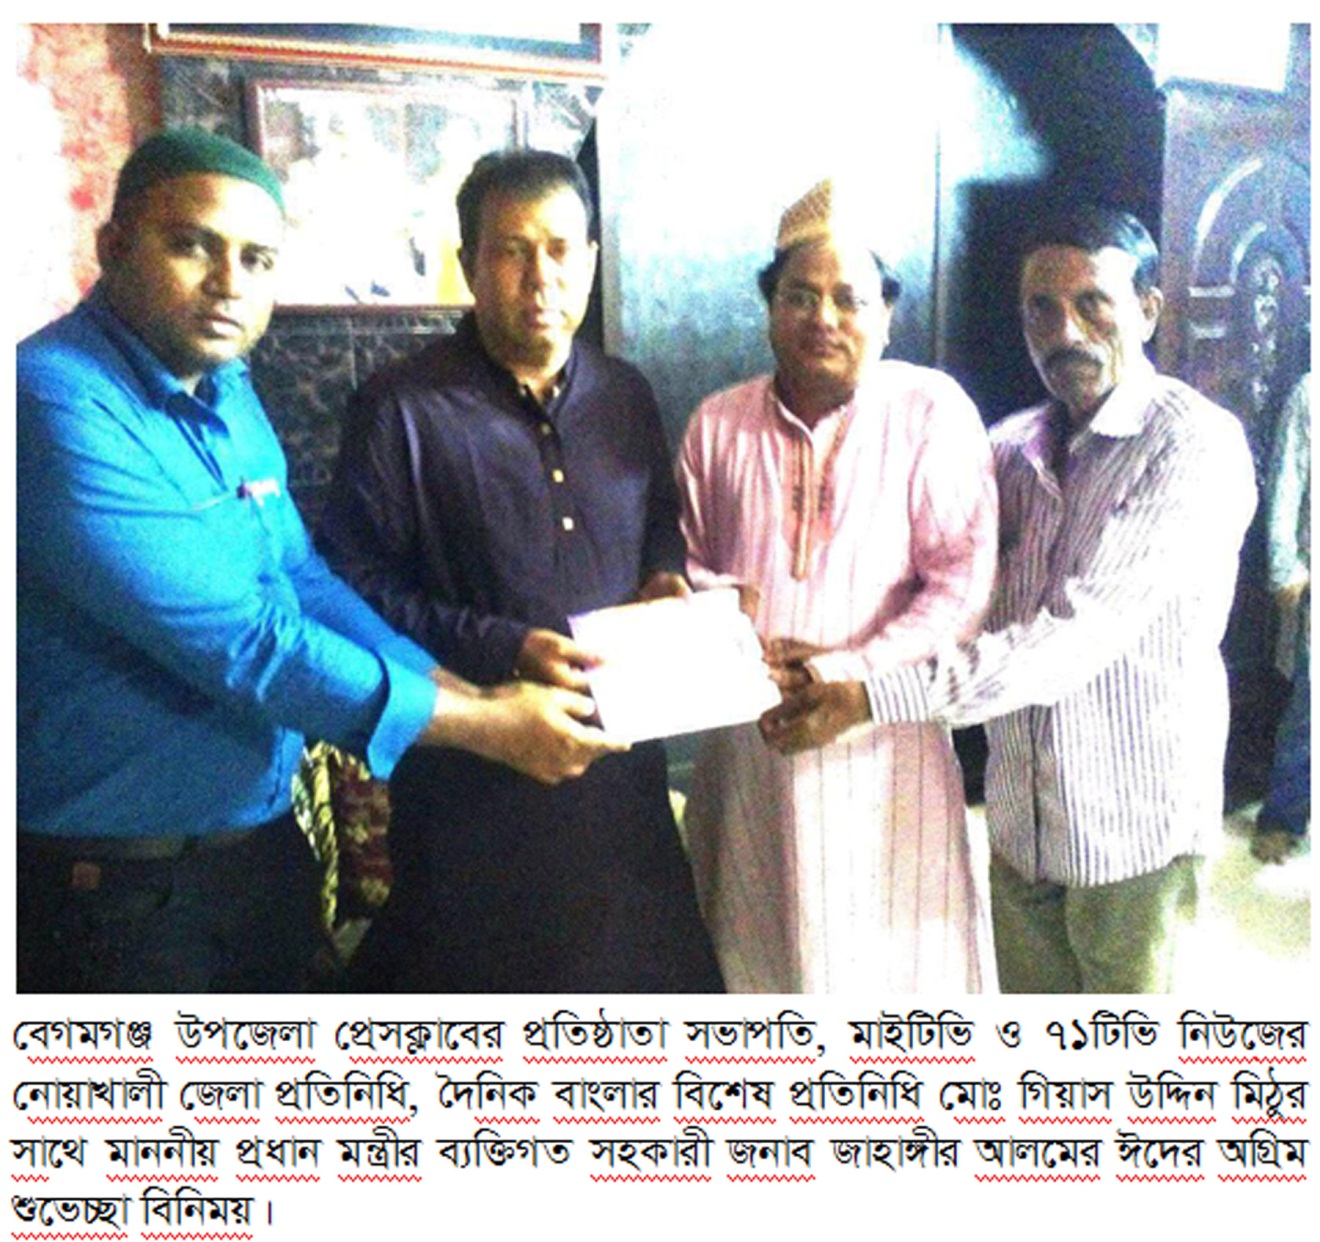 In the picture- Chairman of Begamganj-Sonaimuri Shikkha O Sastha Unnayan Foundation and Principal, Begumganj Technical & Computer Institute Md. Giash Uddin Mithu handed over the Eid greeting card on behalf of the Foundation in the hands of Mr. Jahangir Alam, Special Assistant to the Prime Minister.